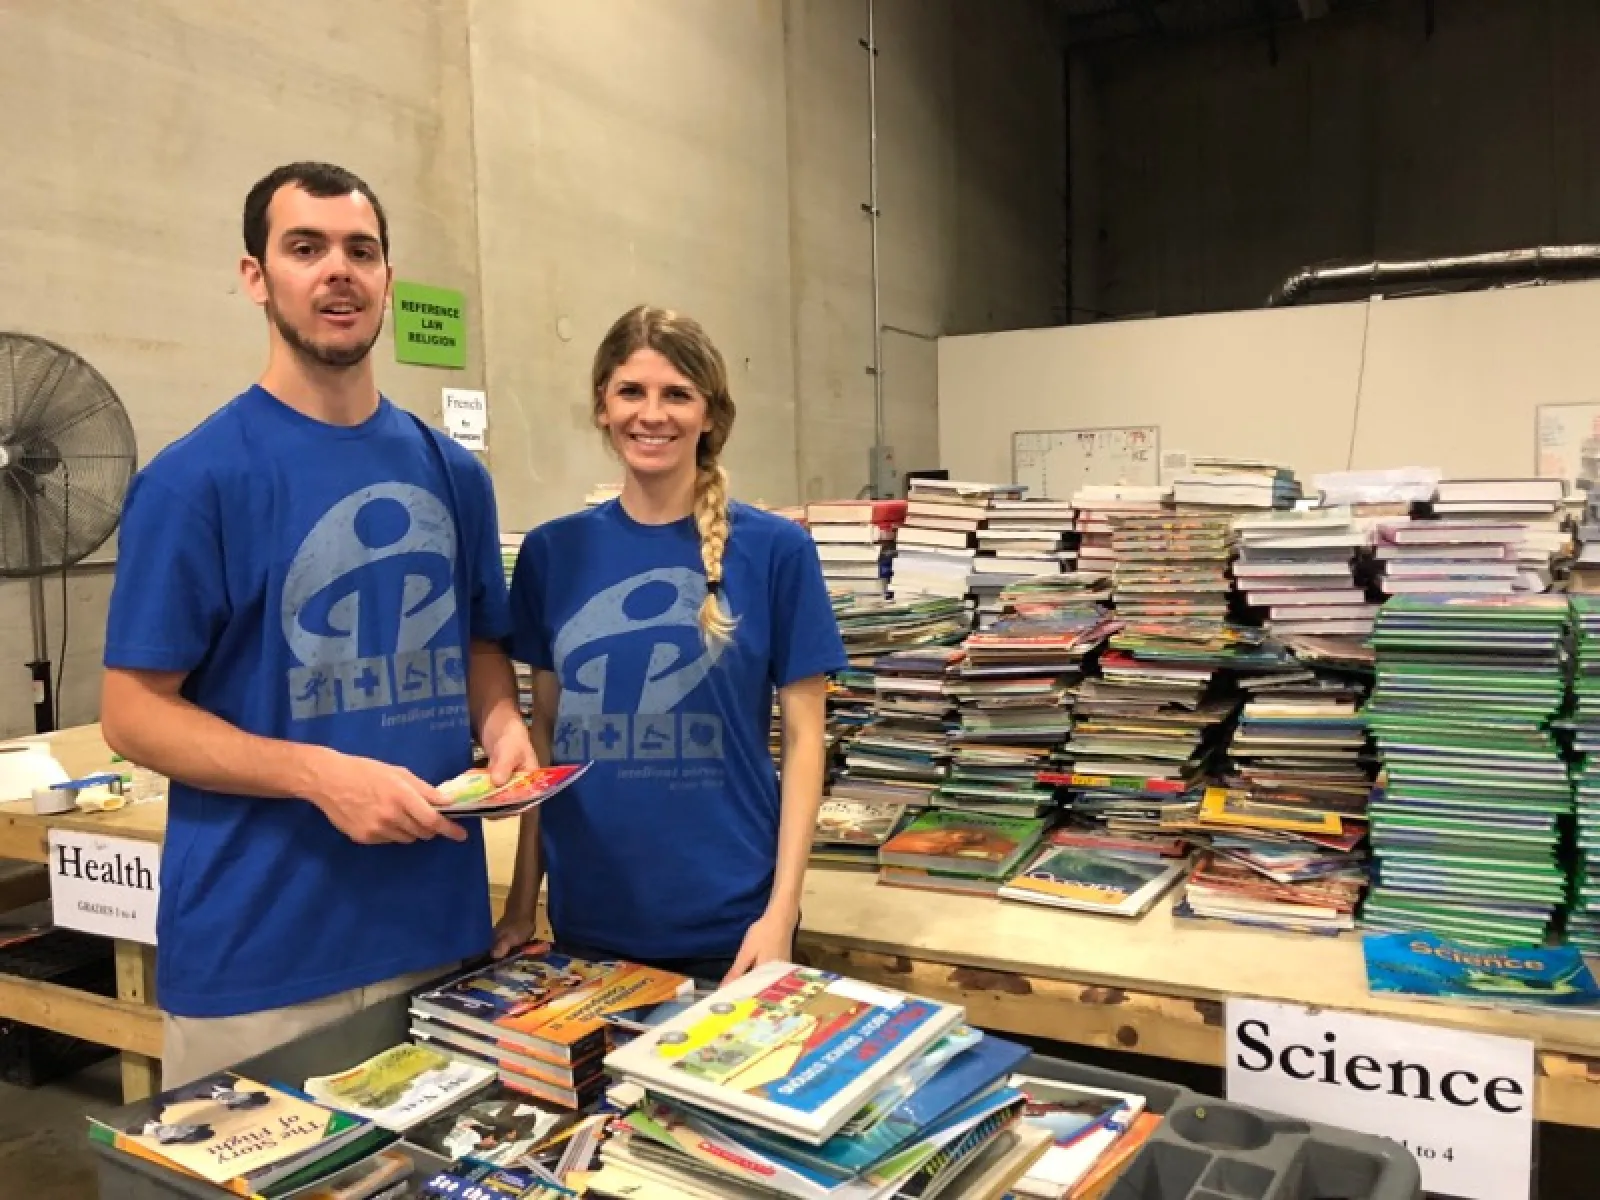 a man and a woman standing next to a table full of books